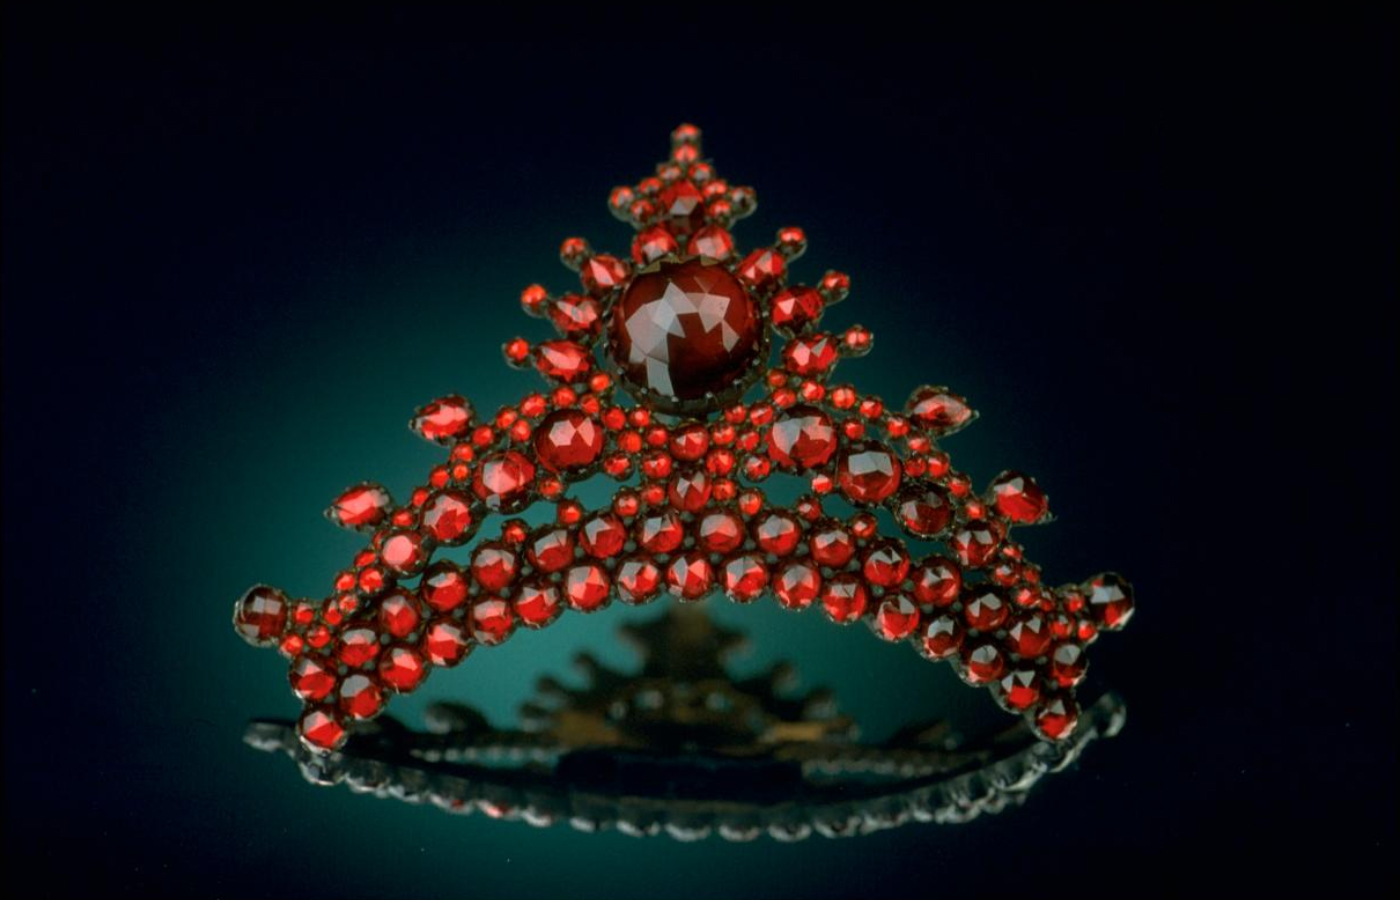 The Antique Pyrope Hair Comb,  set with approximately 100 rose-cut pyrope garnets